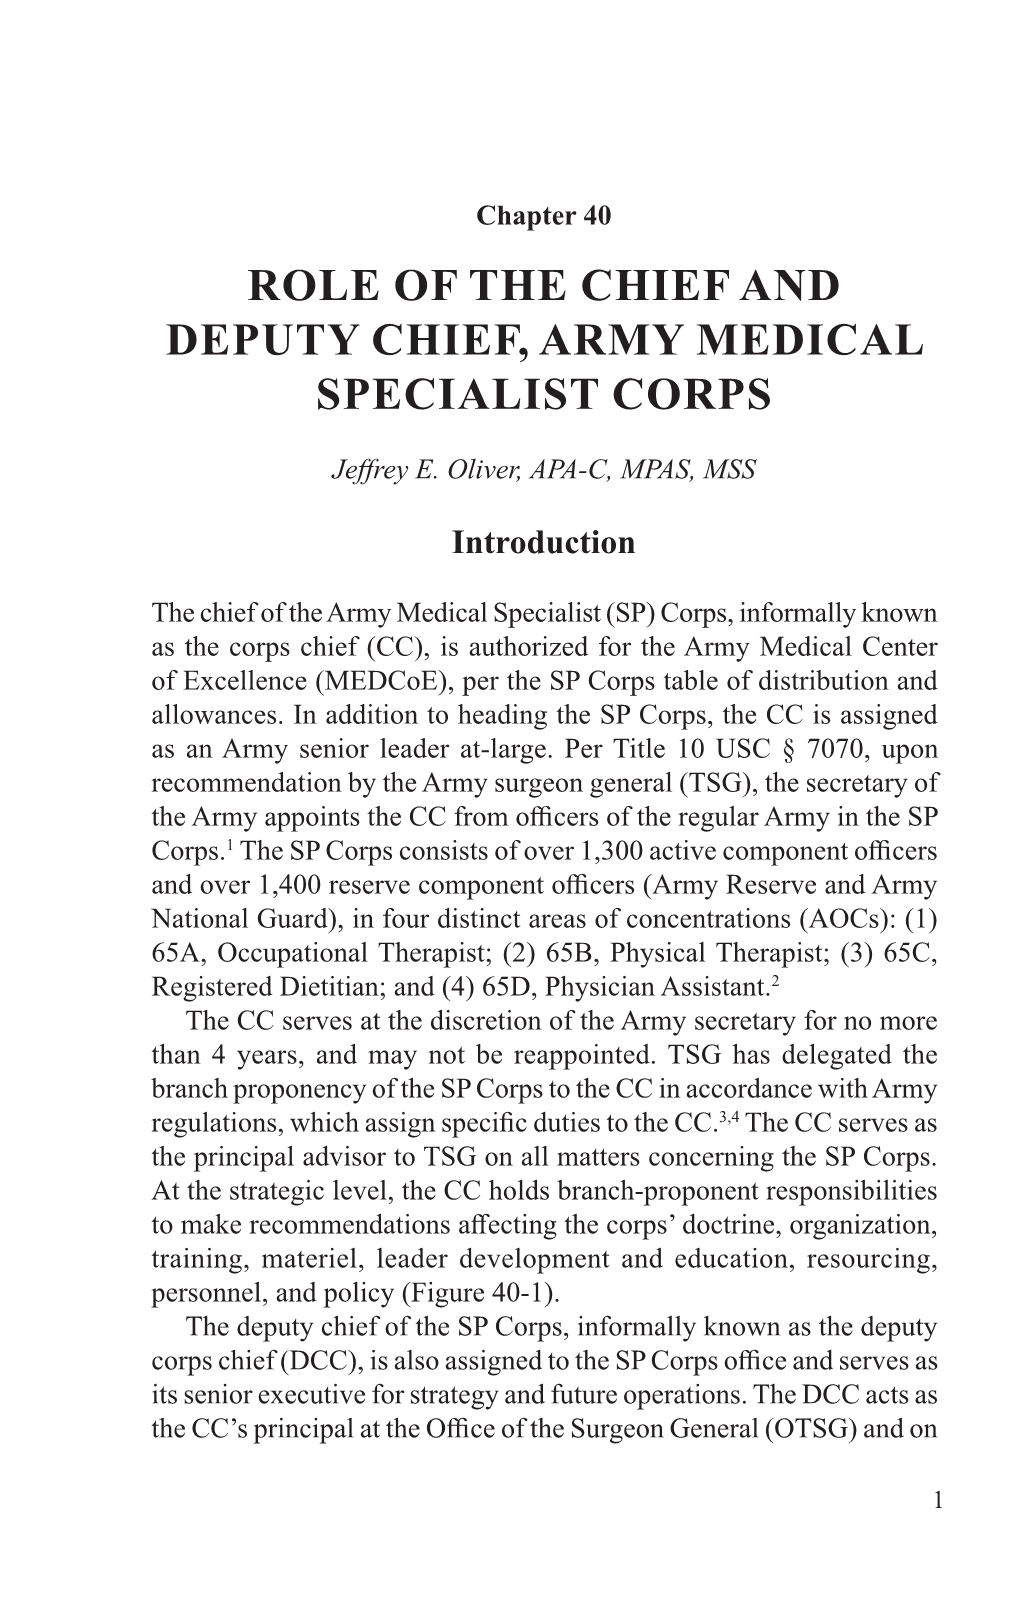 Role of the Chief and Deputy Chief, Army Medical Specialist Corps